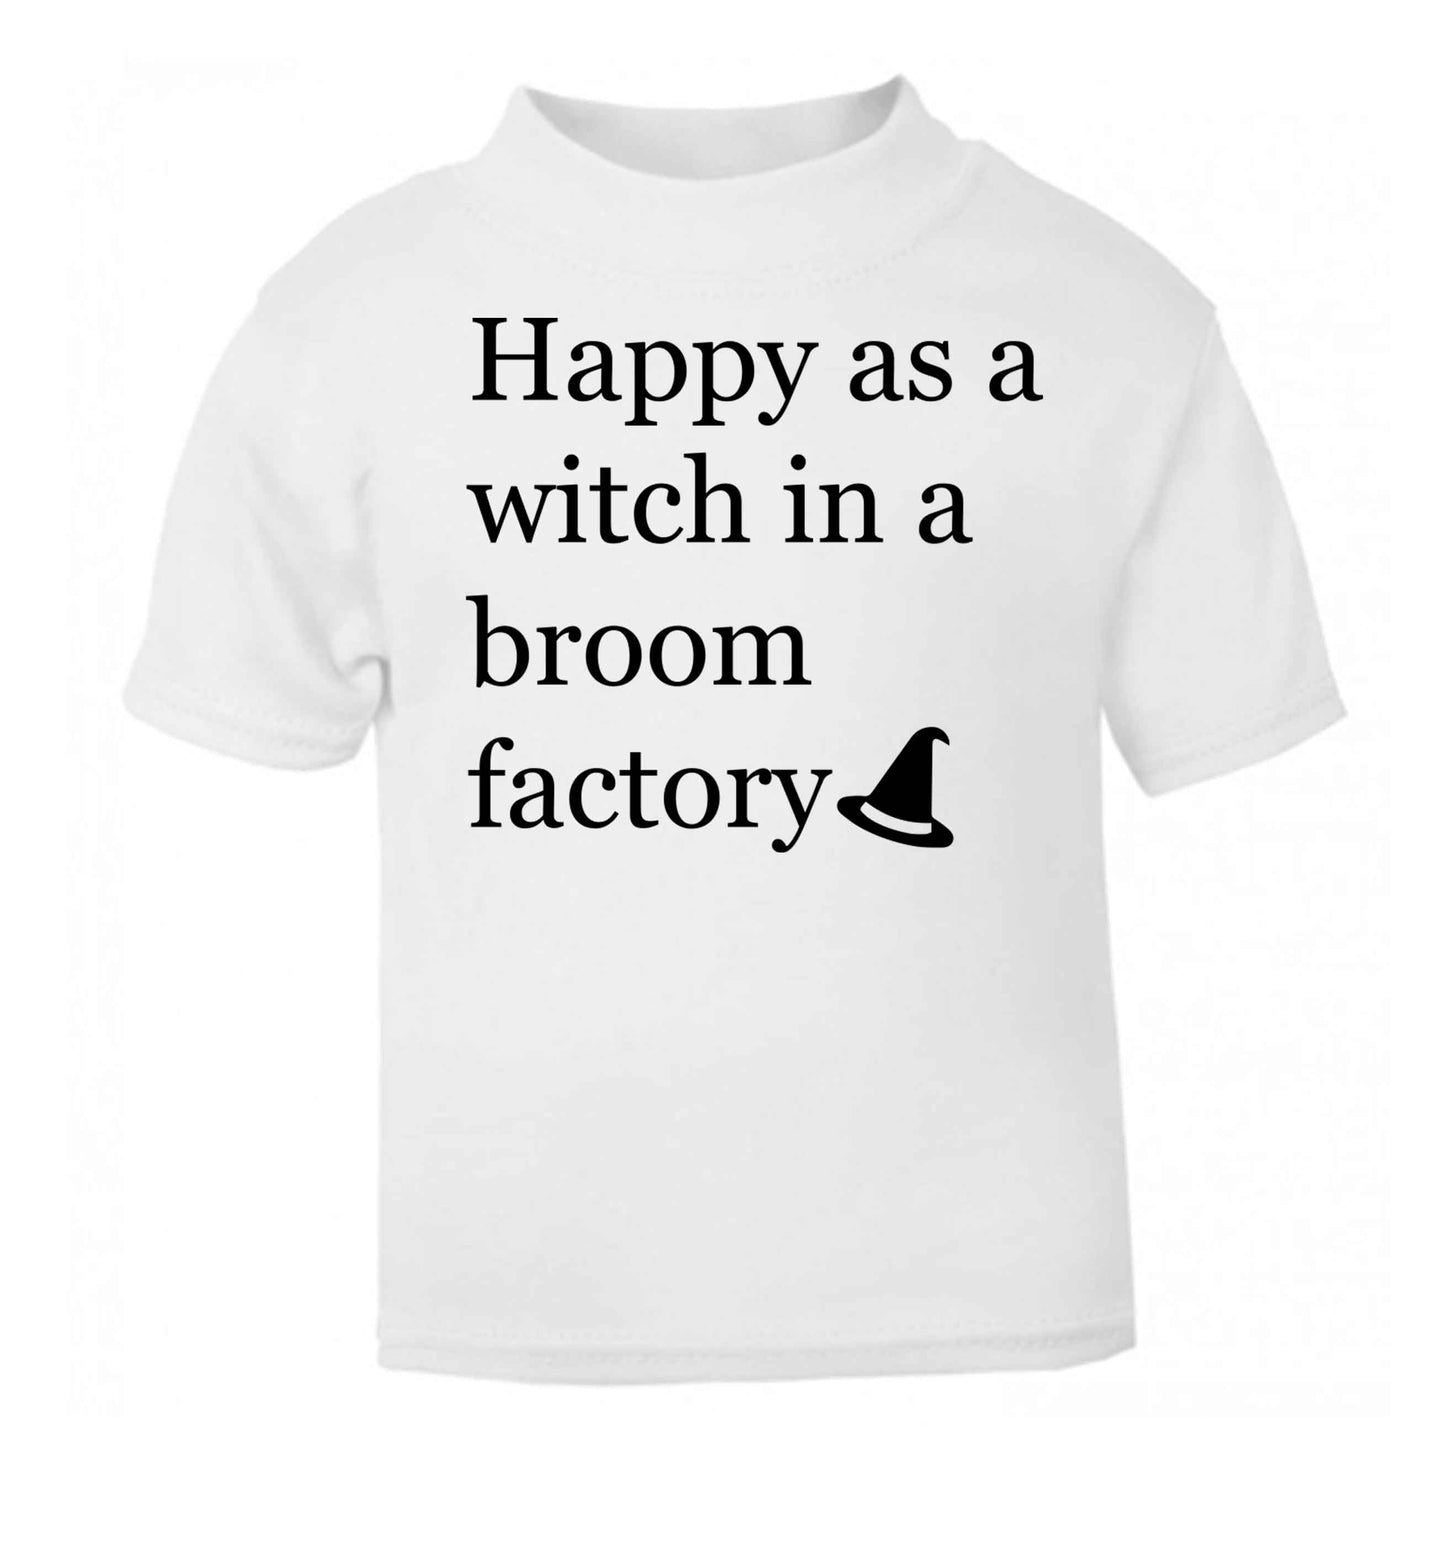 Happy as a witch in a broom factory white baby toddler Tshirt 2 Years